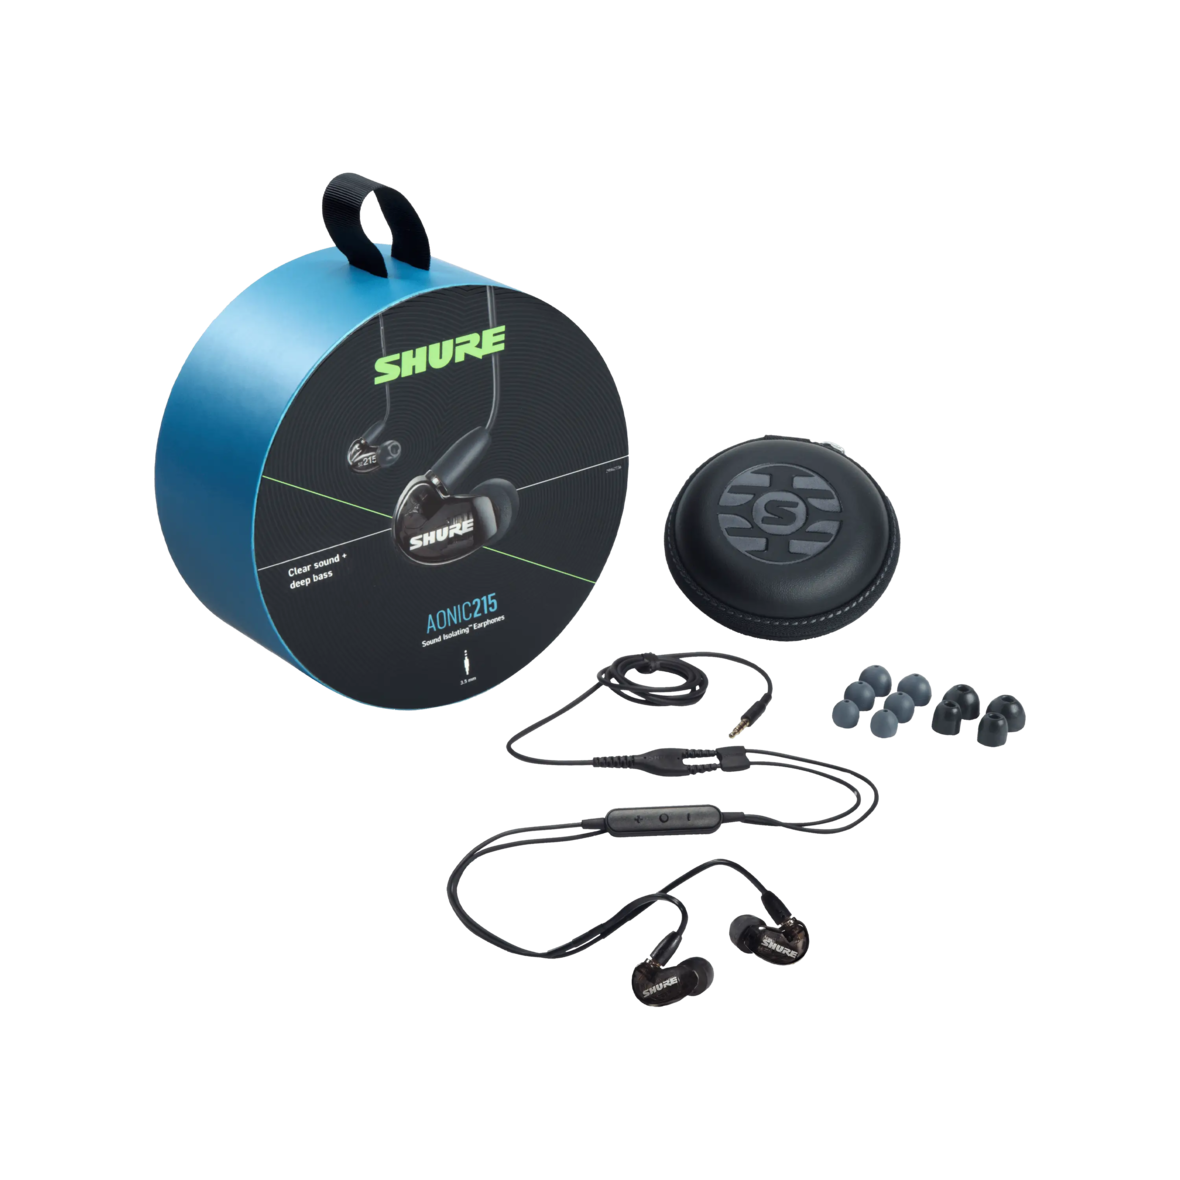 AONIC 215 - Sound Isolating™ Earphones - Shure Middle East and Africa